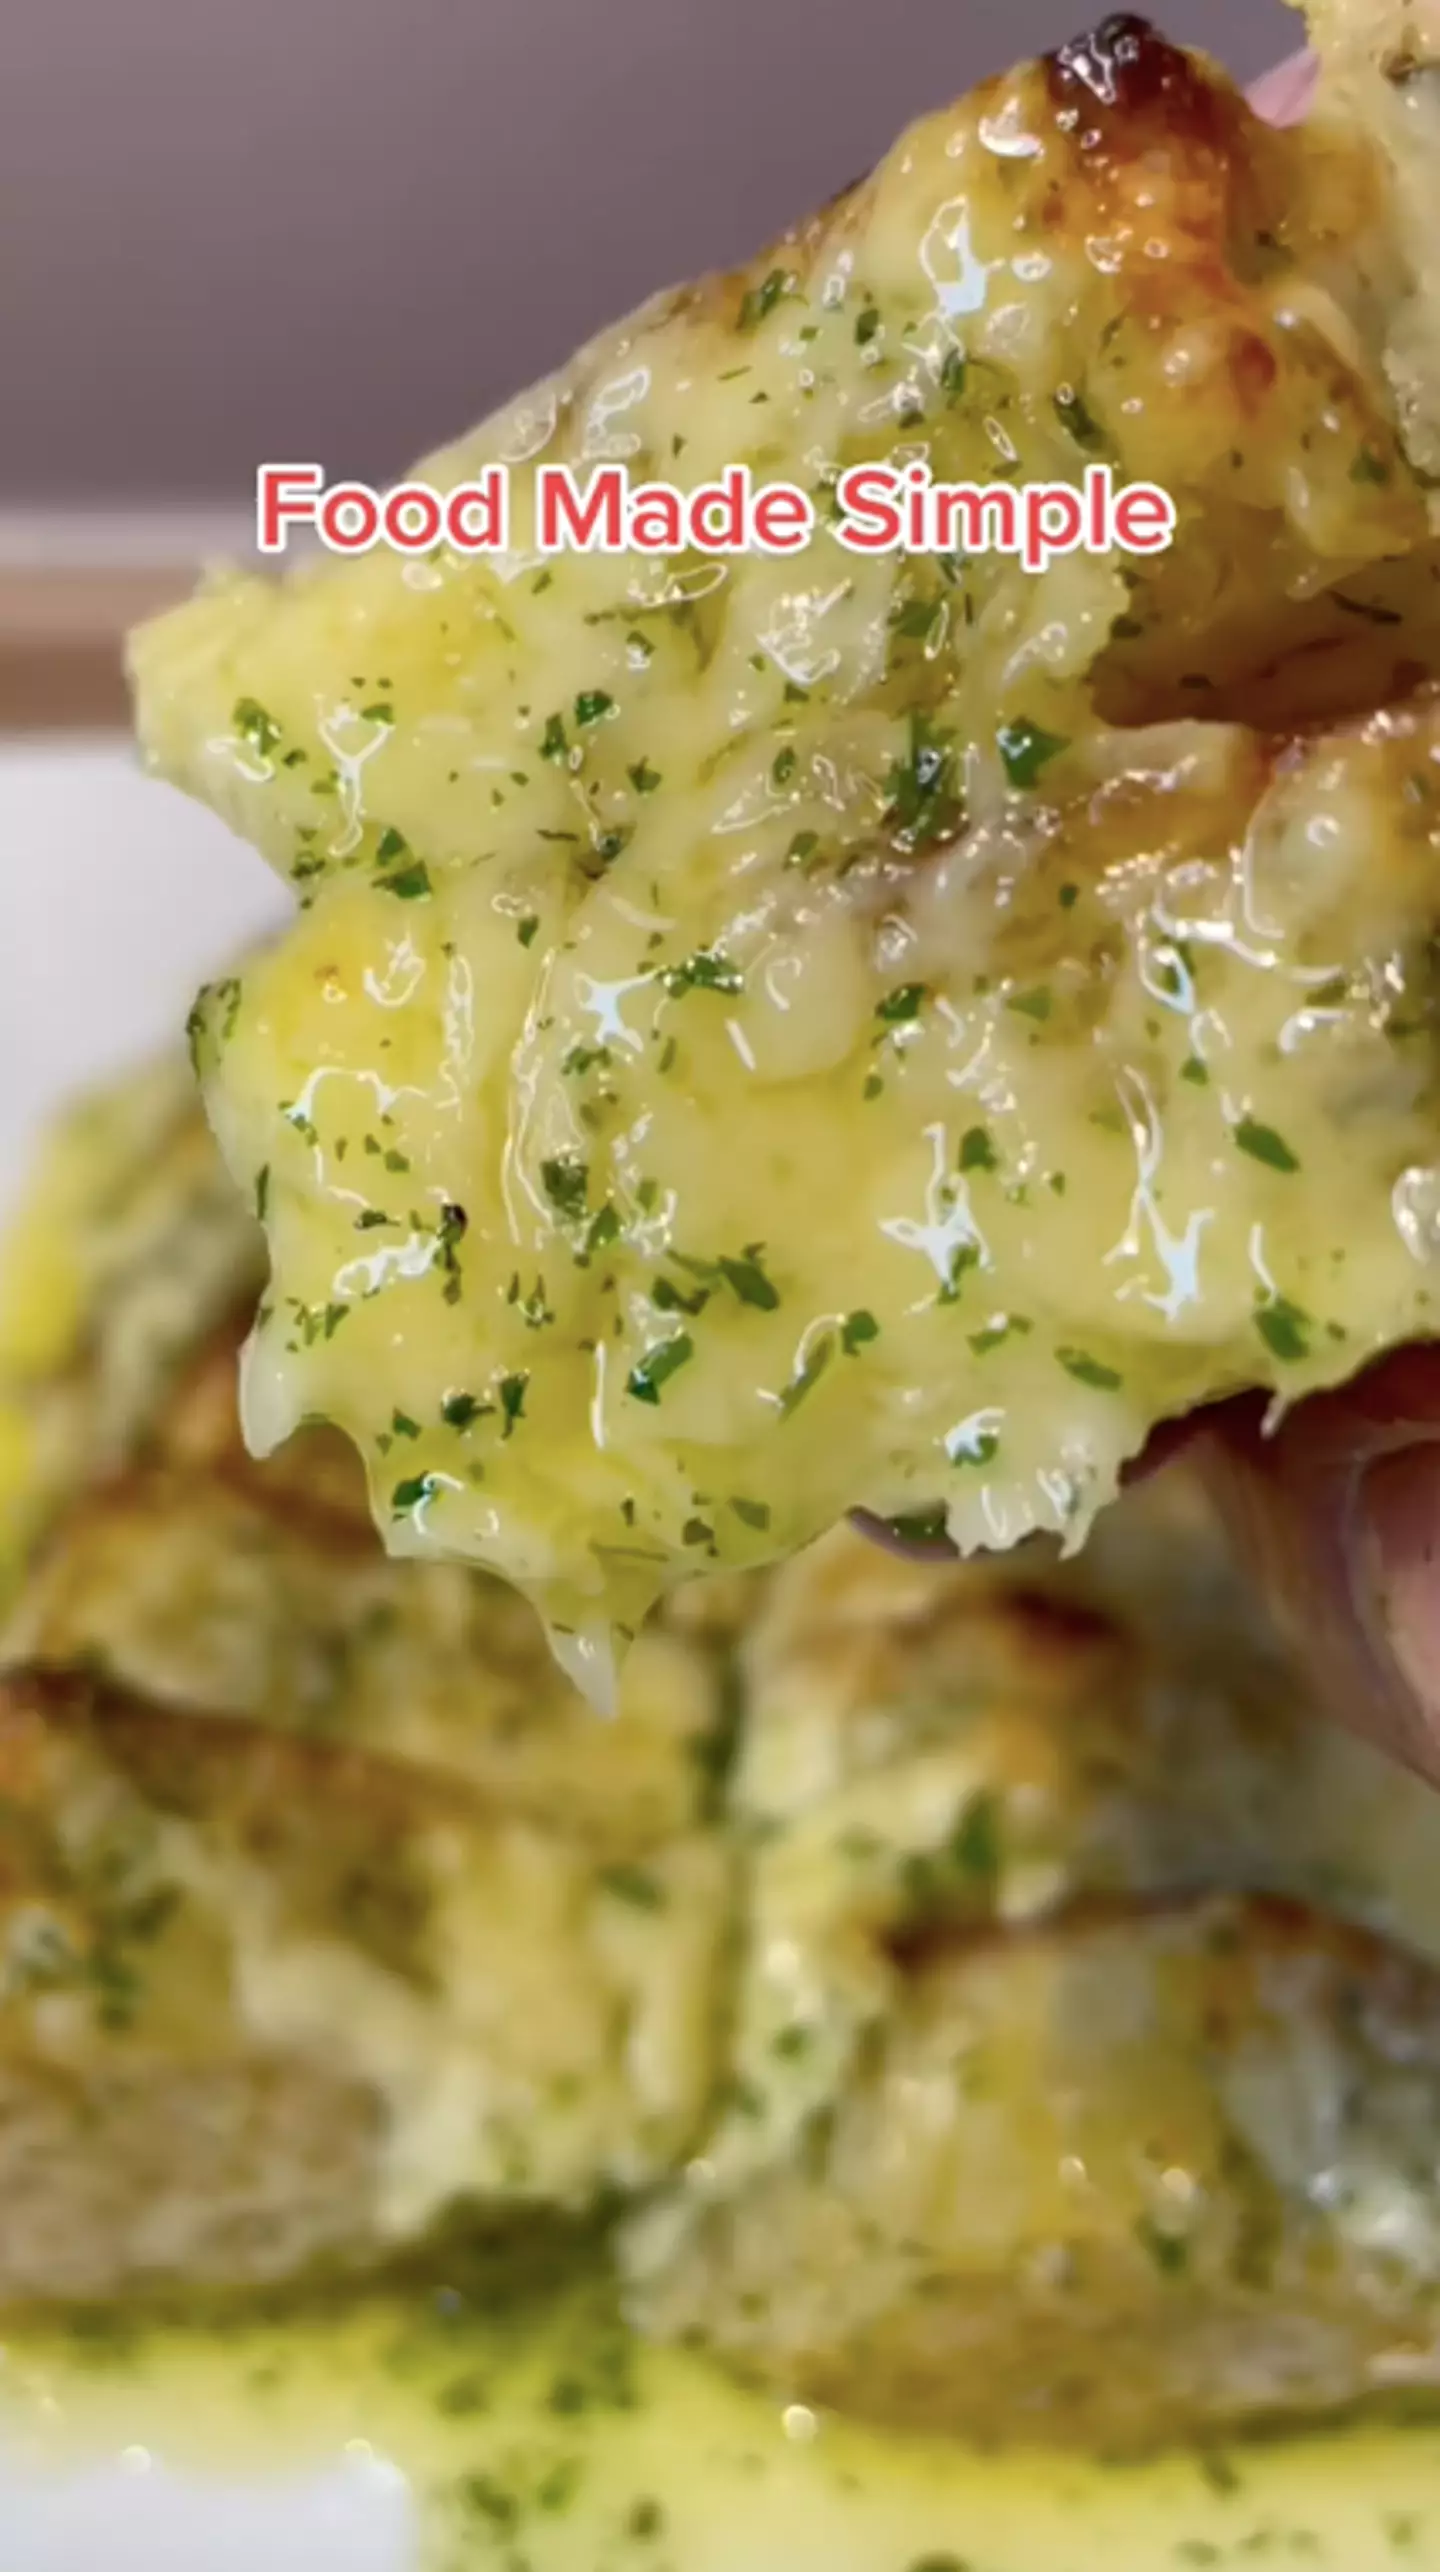 We are drooling at these cheesy garlic crumpets (